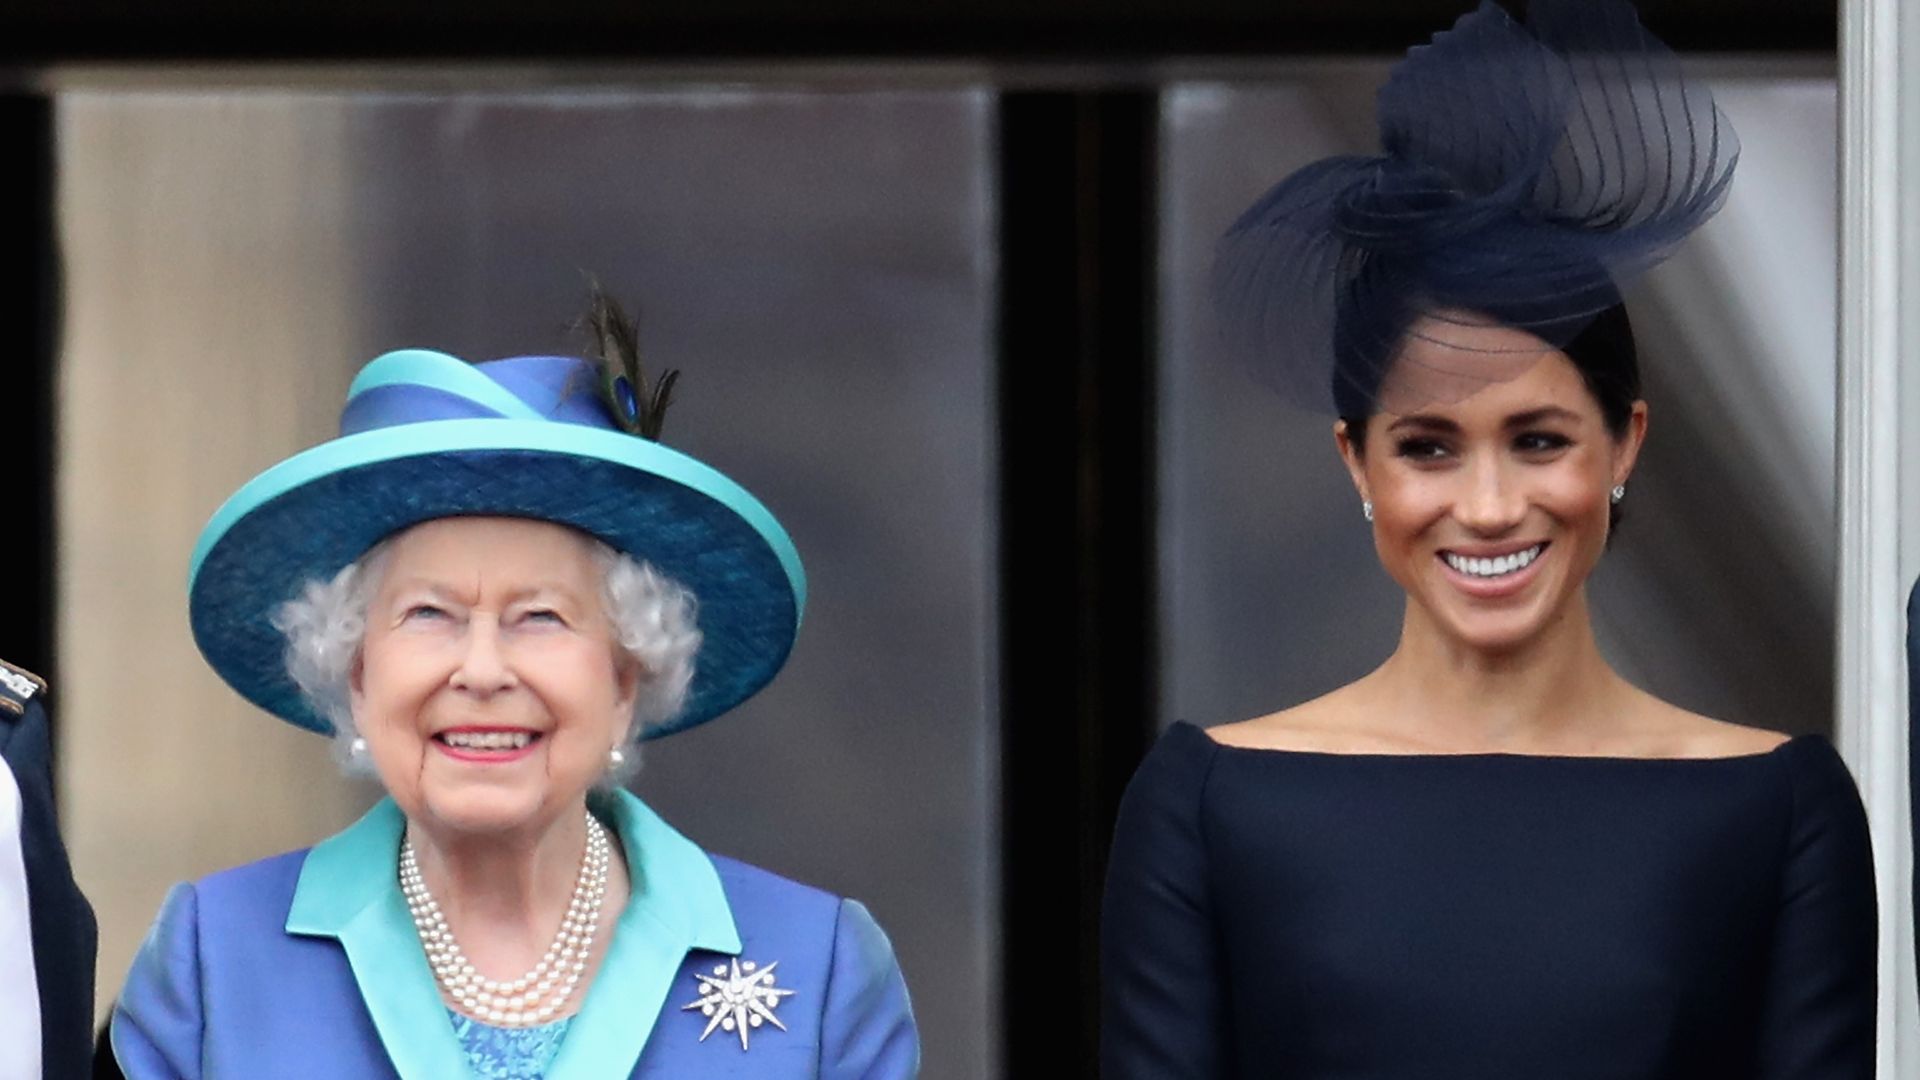 The Queen standing next to Meghan Markle